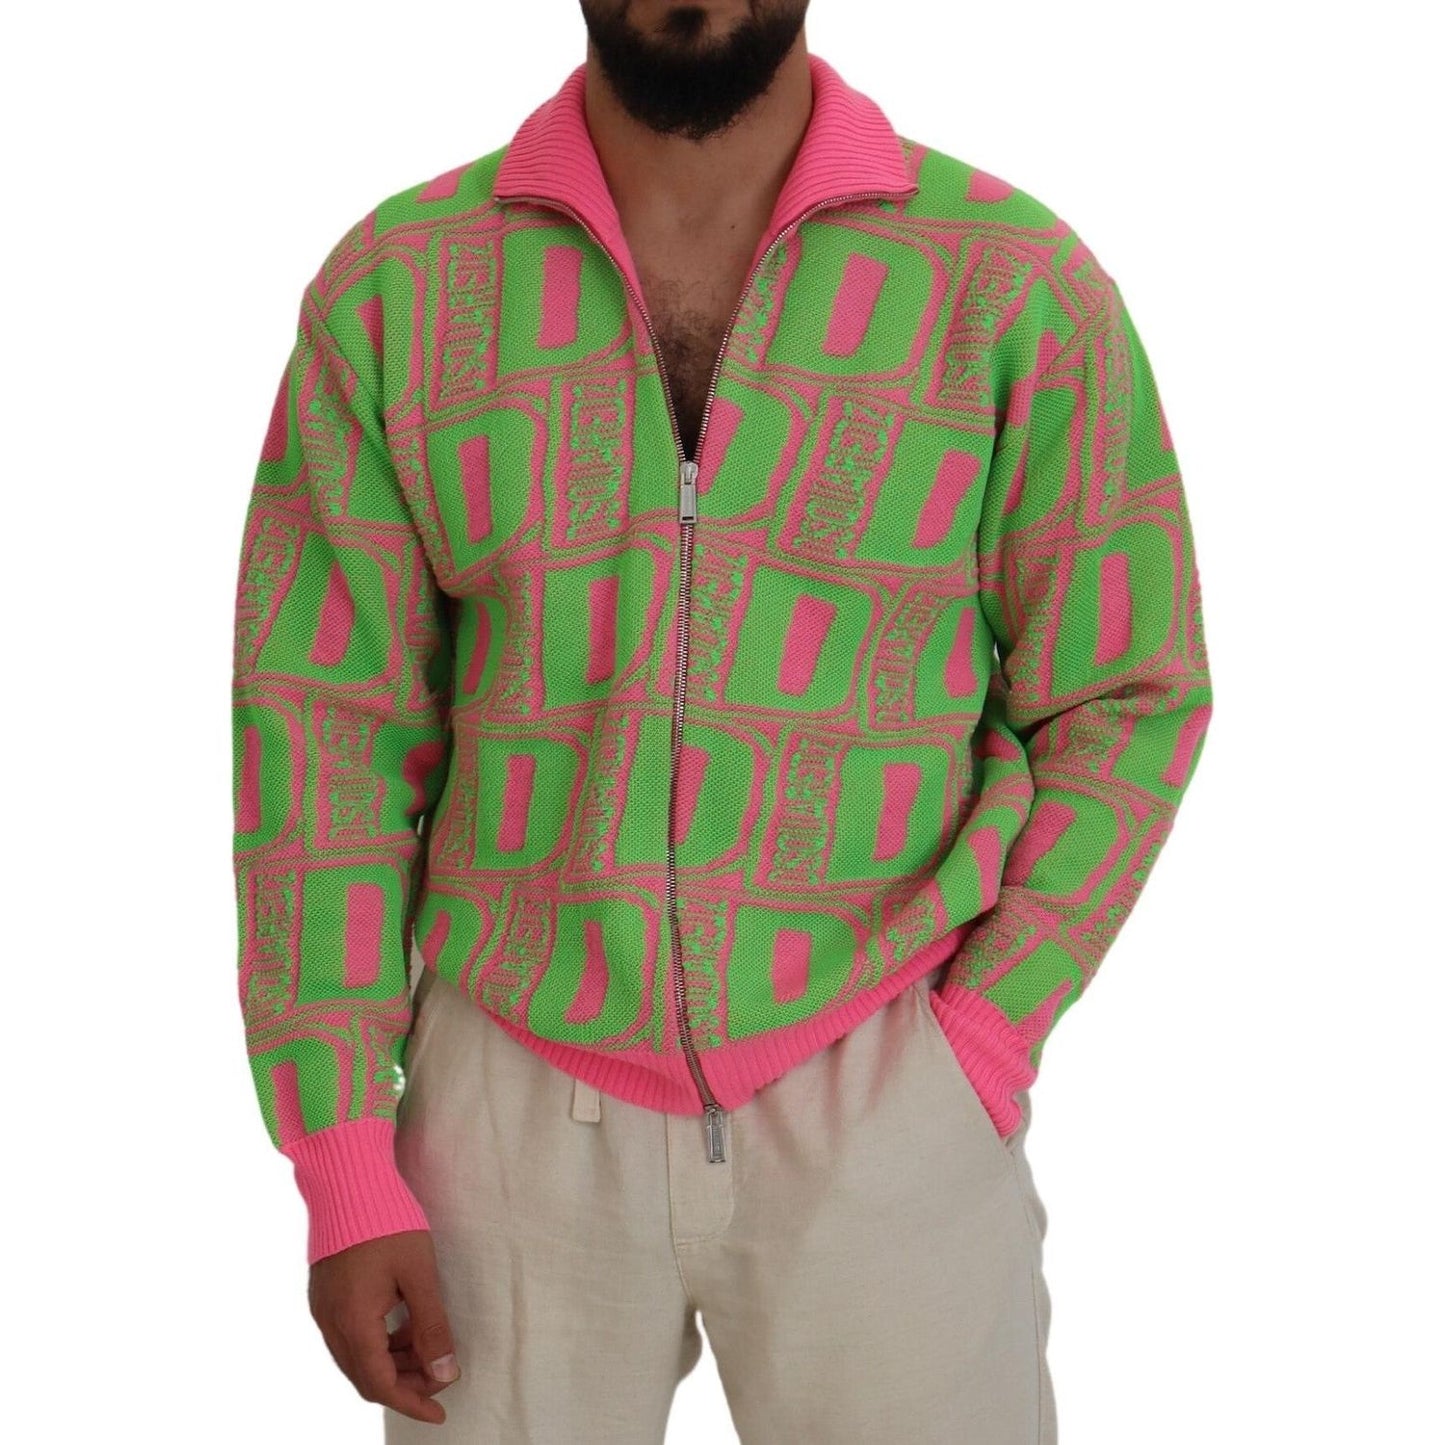 Dsquared² Pink Green Collared Long Sleeves Full Zip Sweater pink-green-collared-long-sleeves-full-zip-sweater